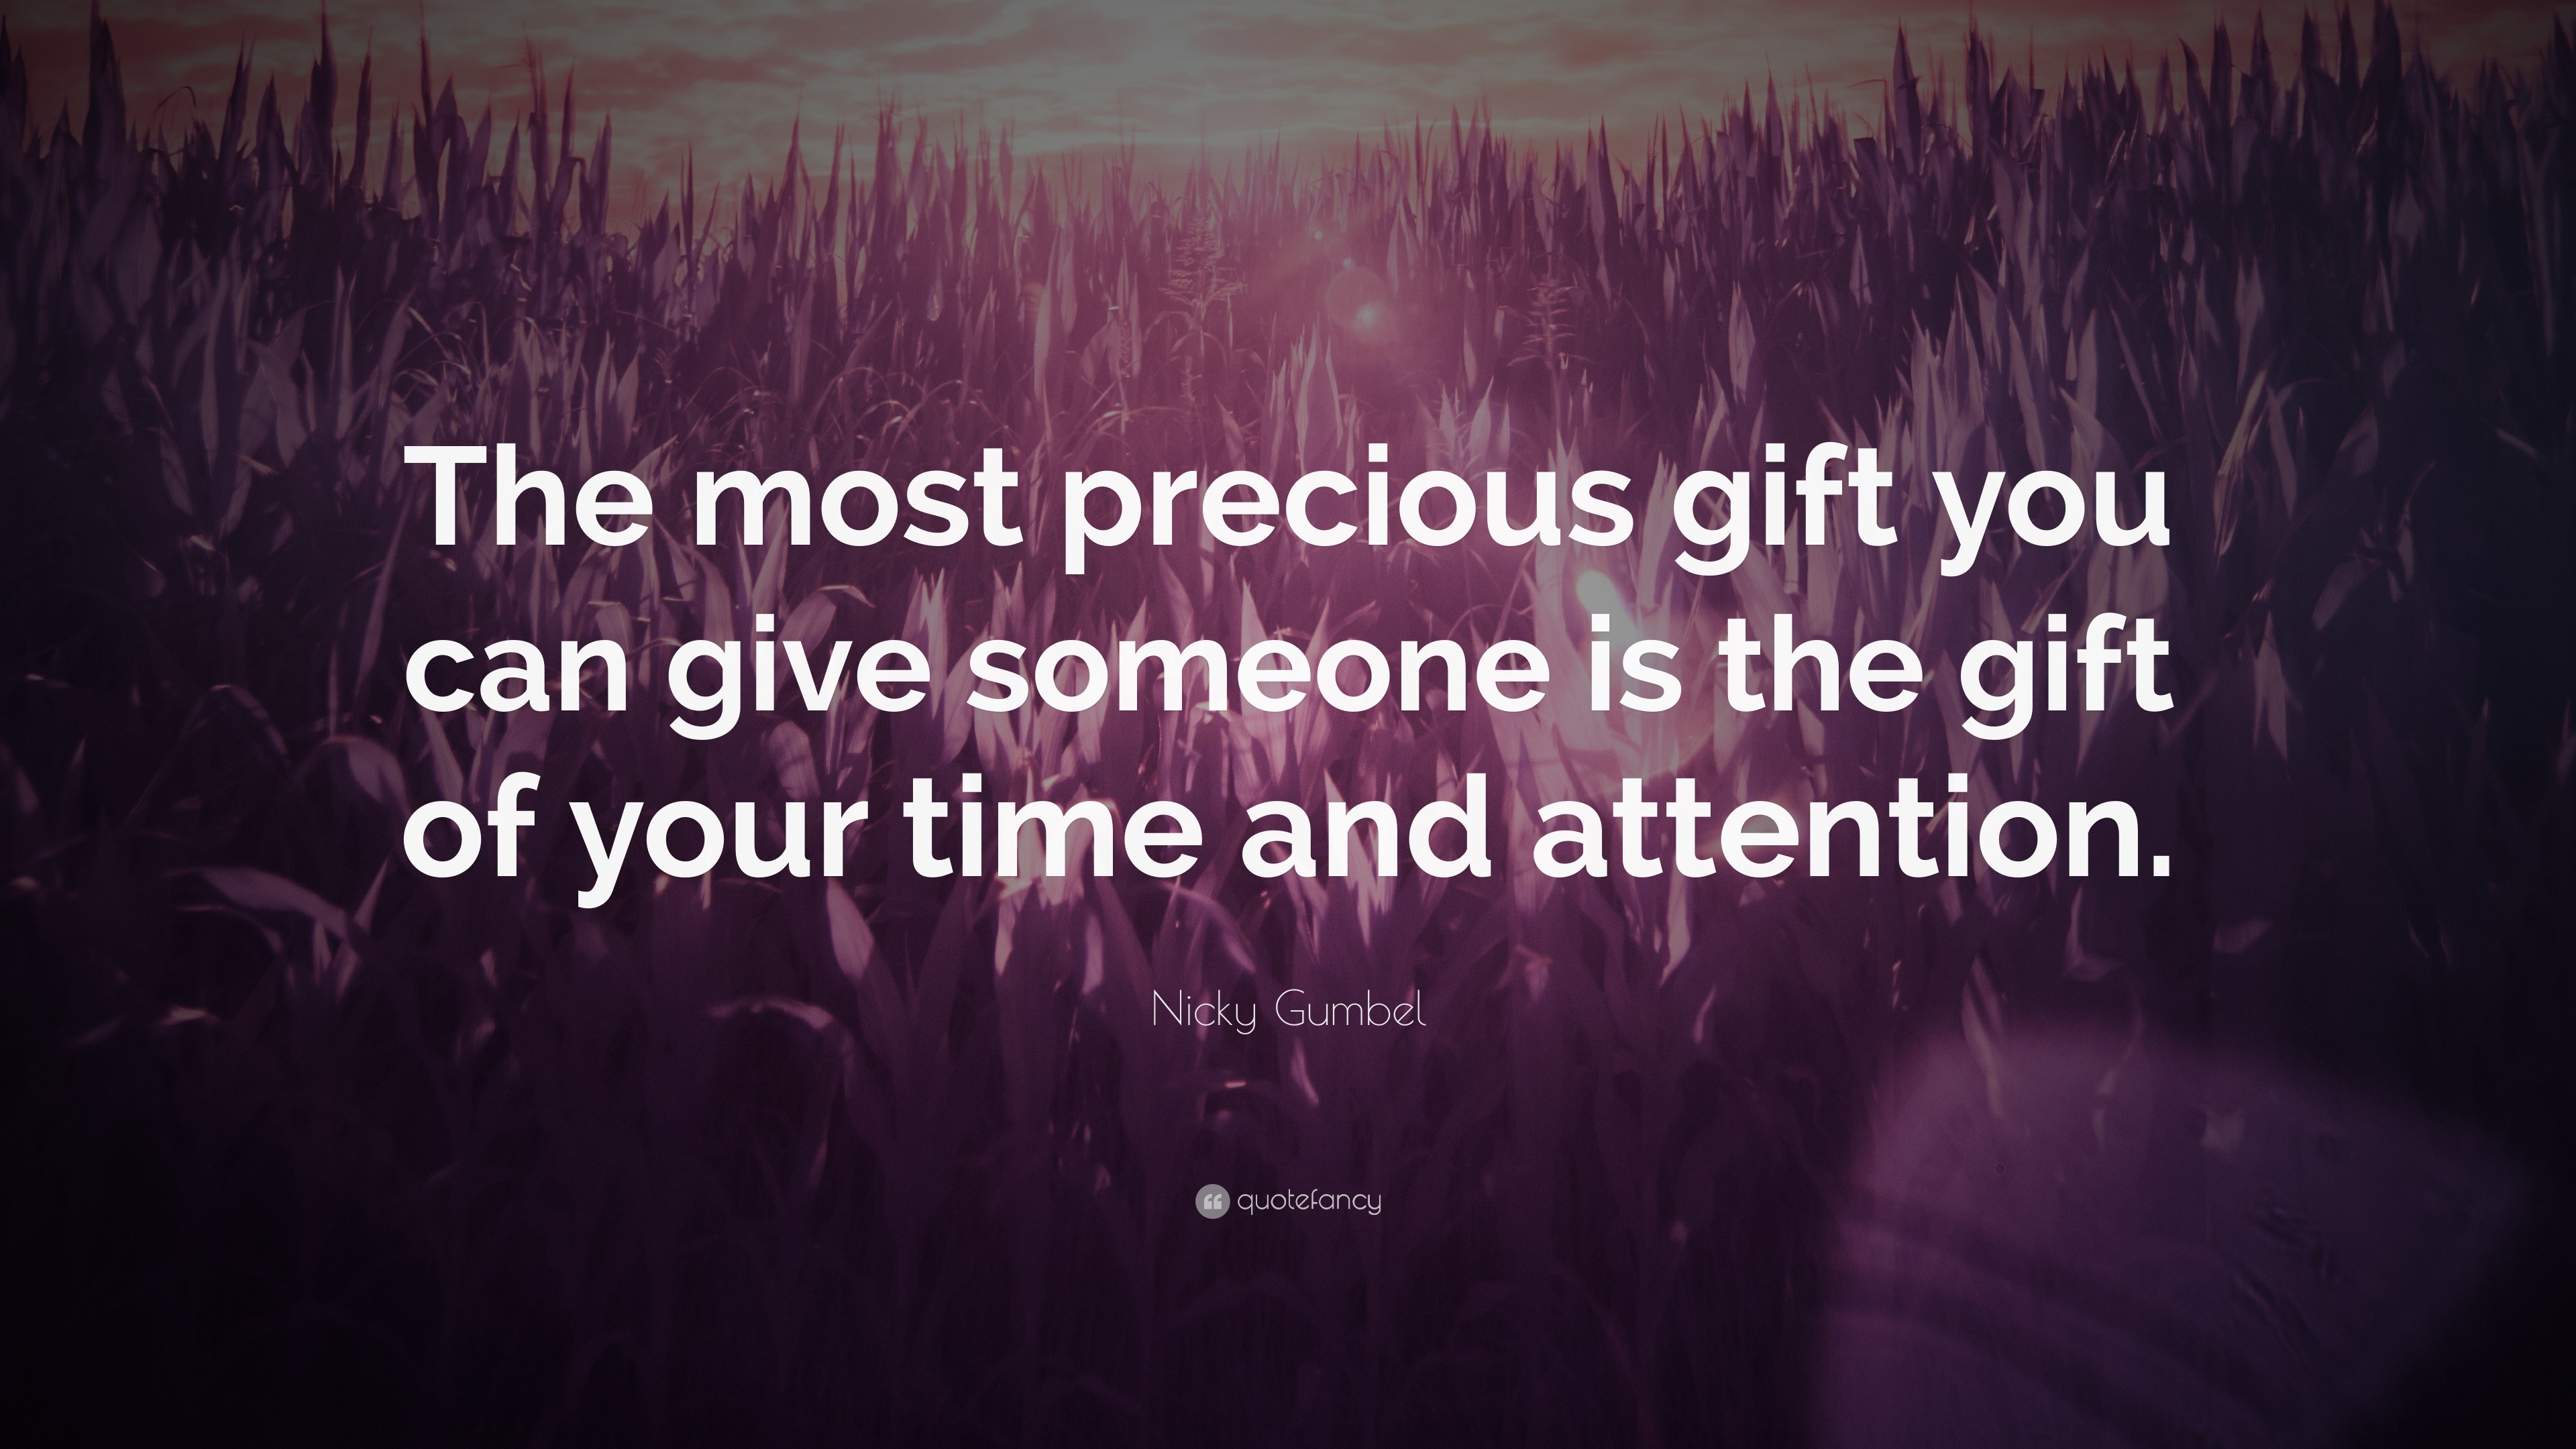 Nicky Gumbel Quote “the Most Precious T You Can Give Someone Is The